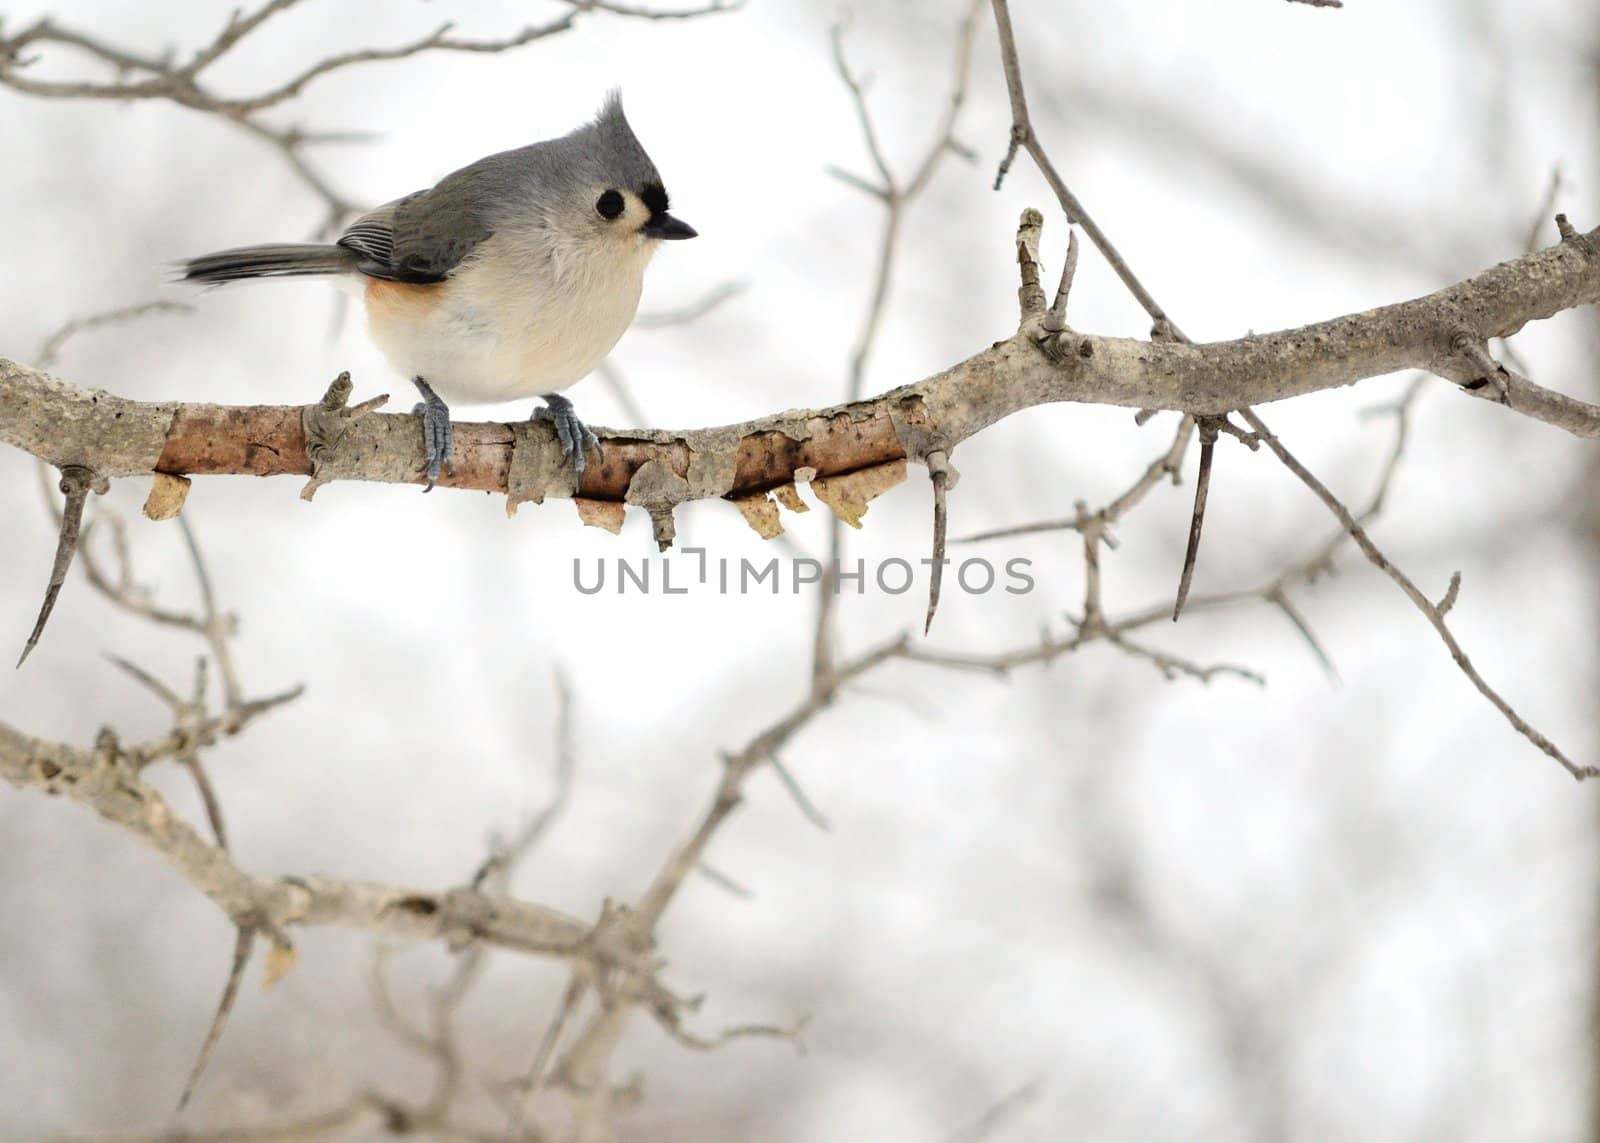 Tufted Titmouse by brm1949